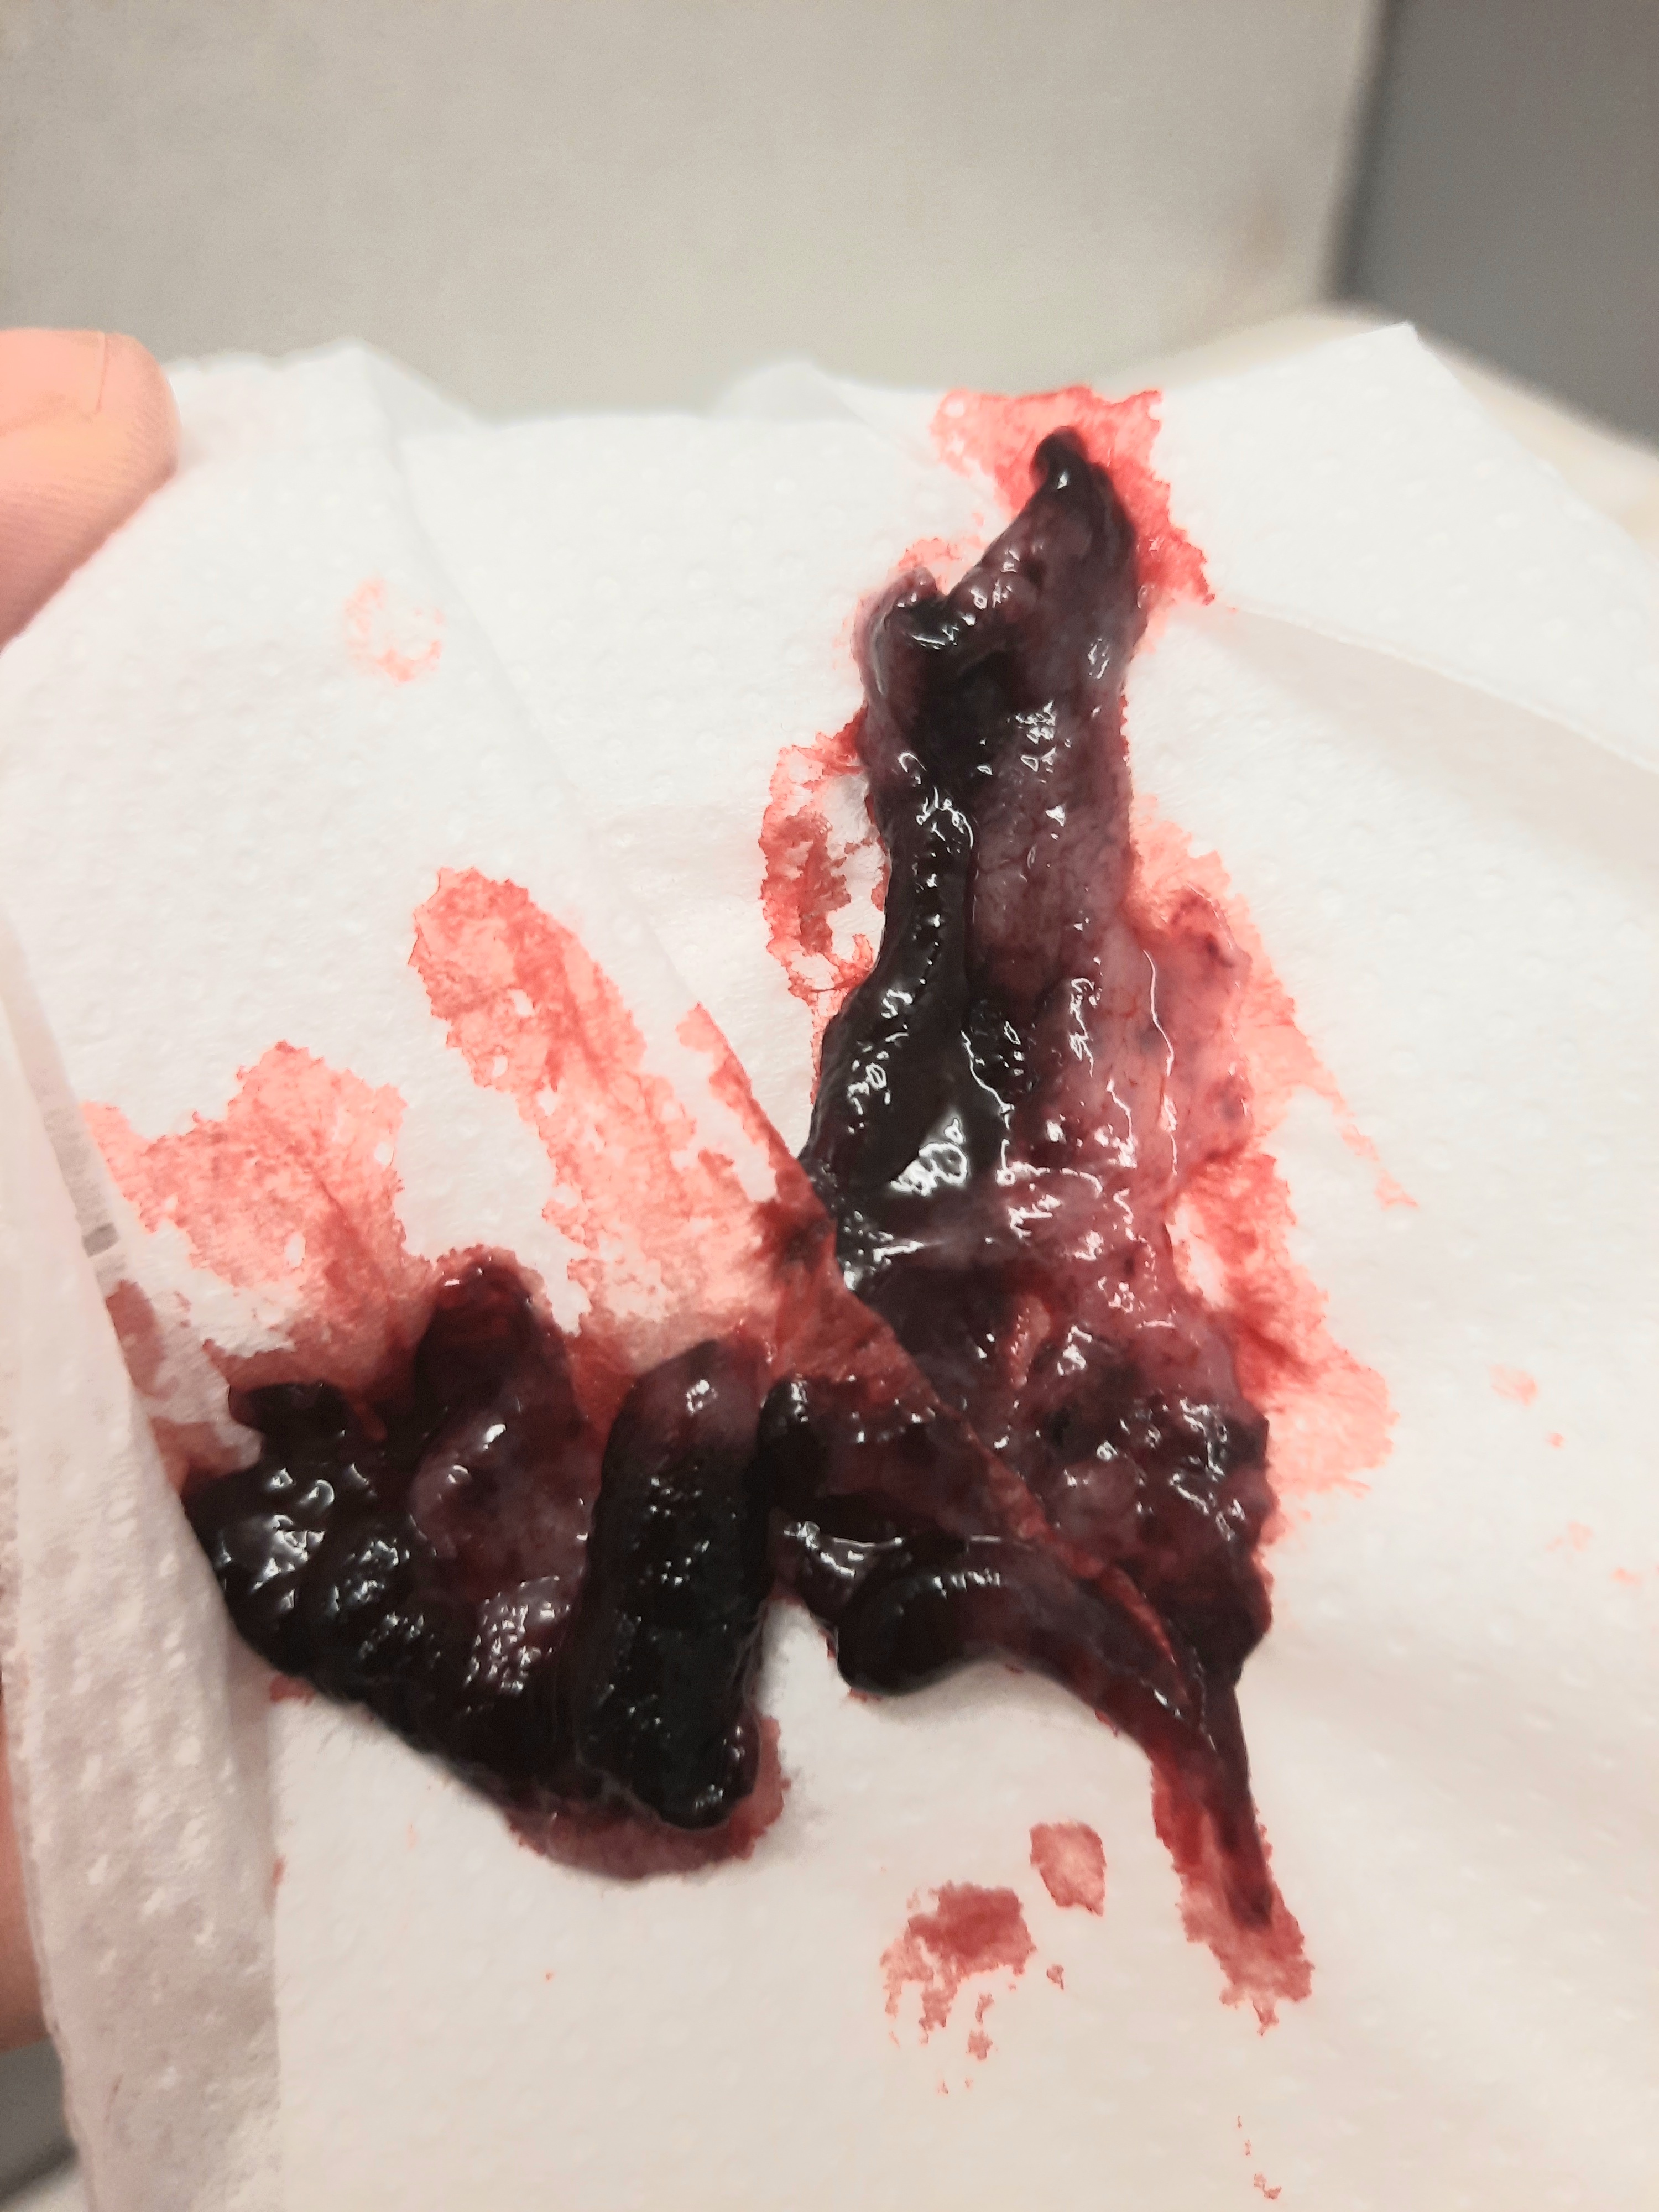 Miscarriage or blood clots? Sorry for TMI pictures